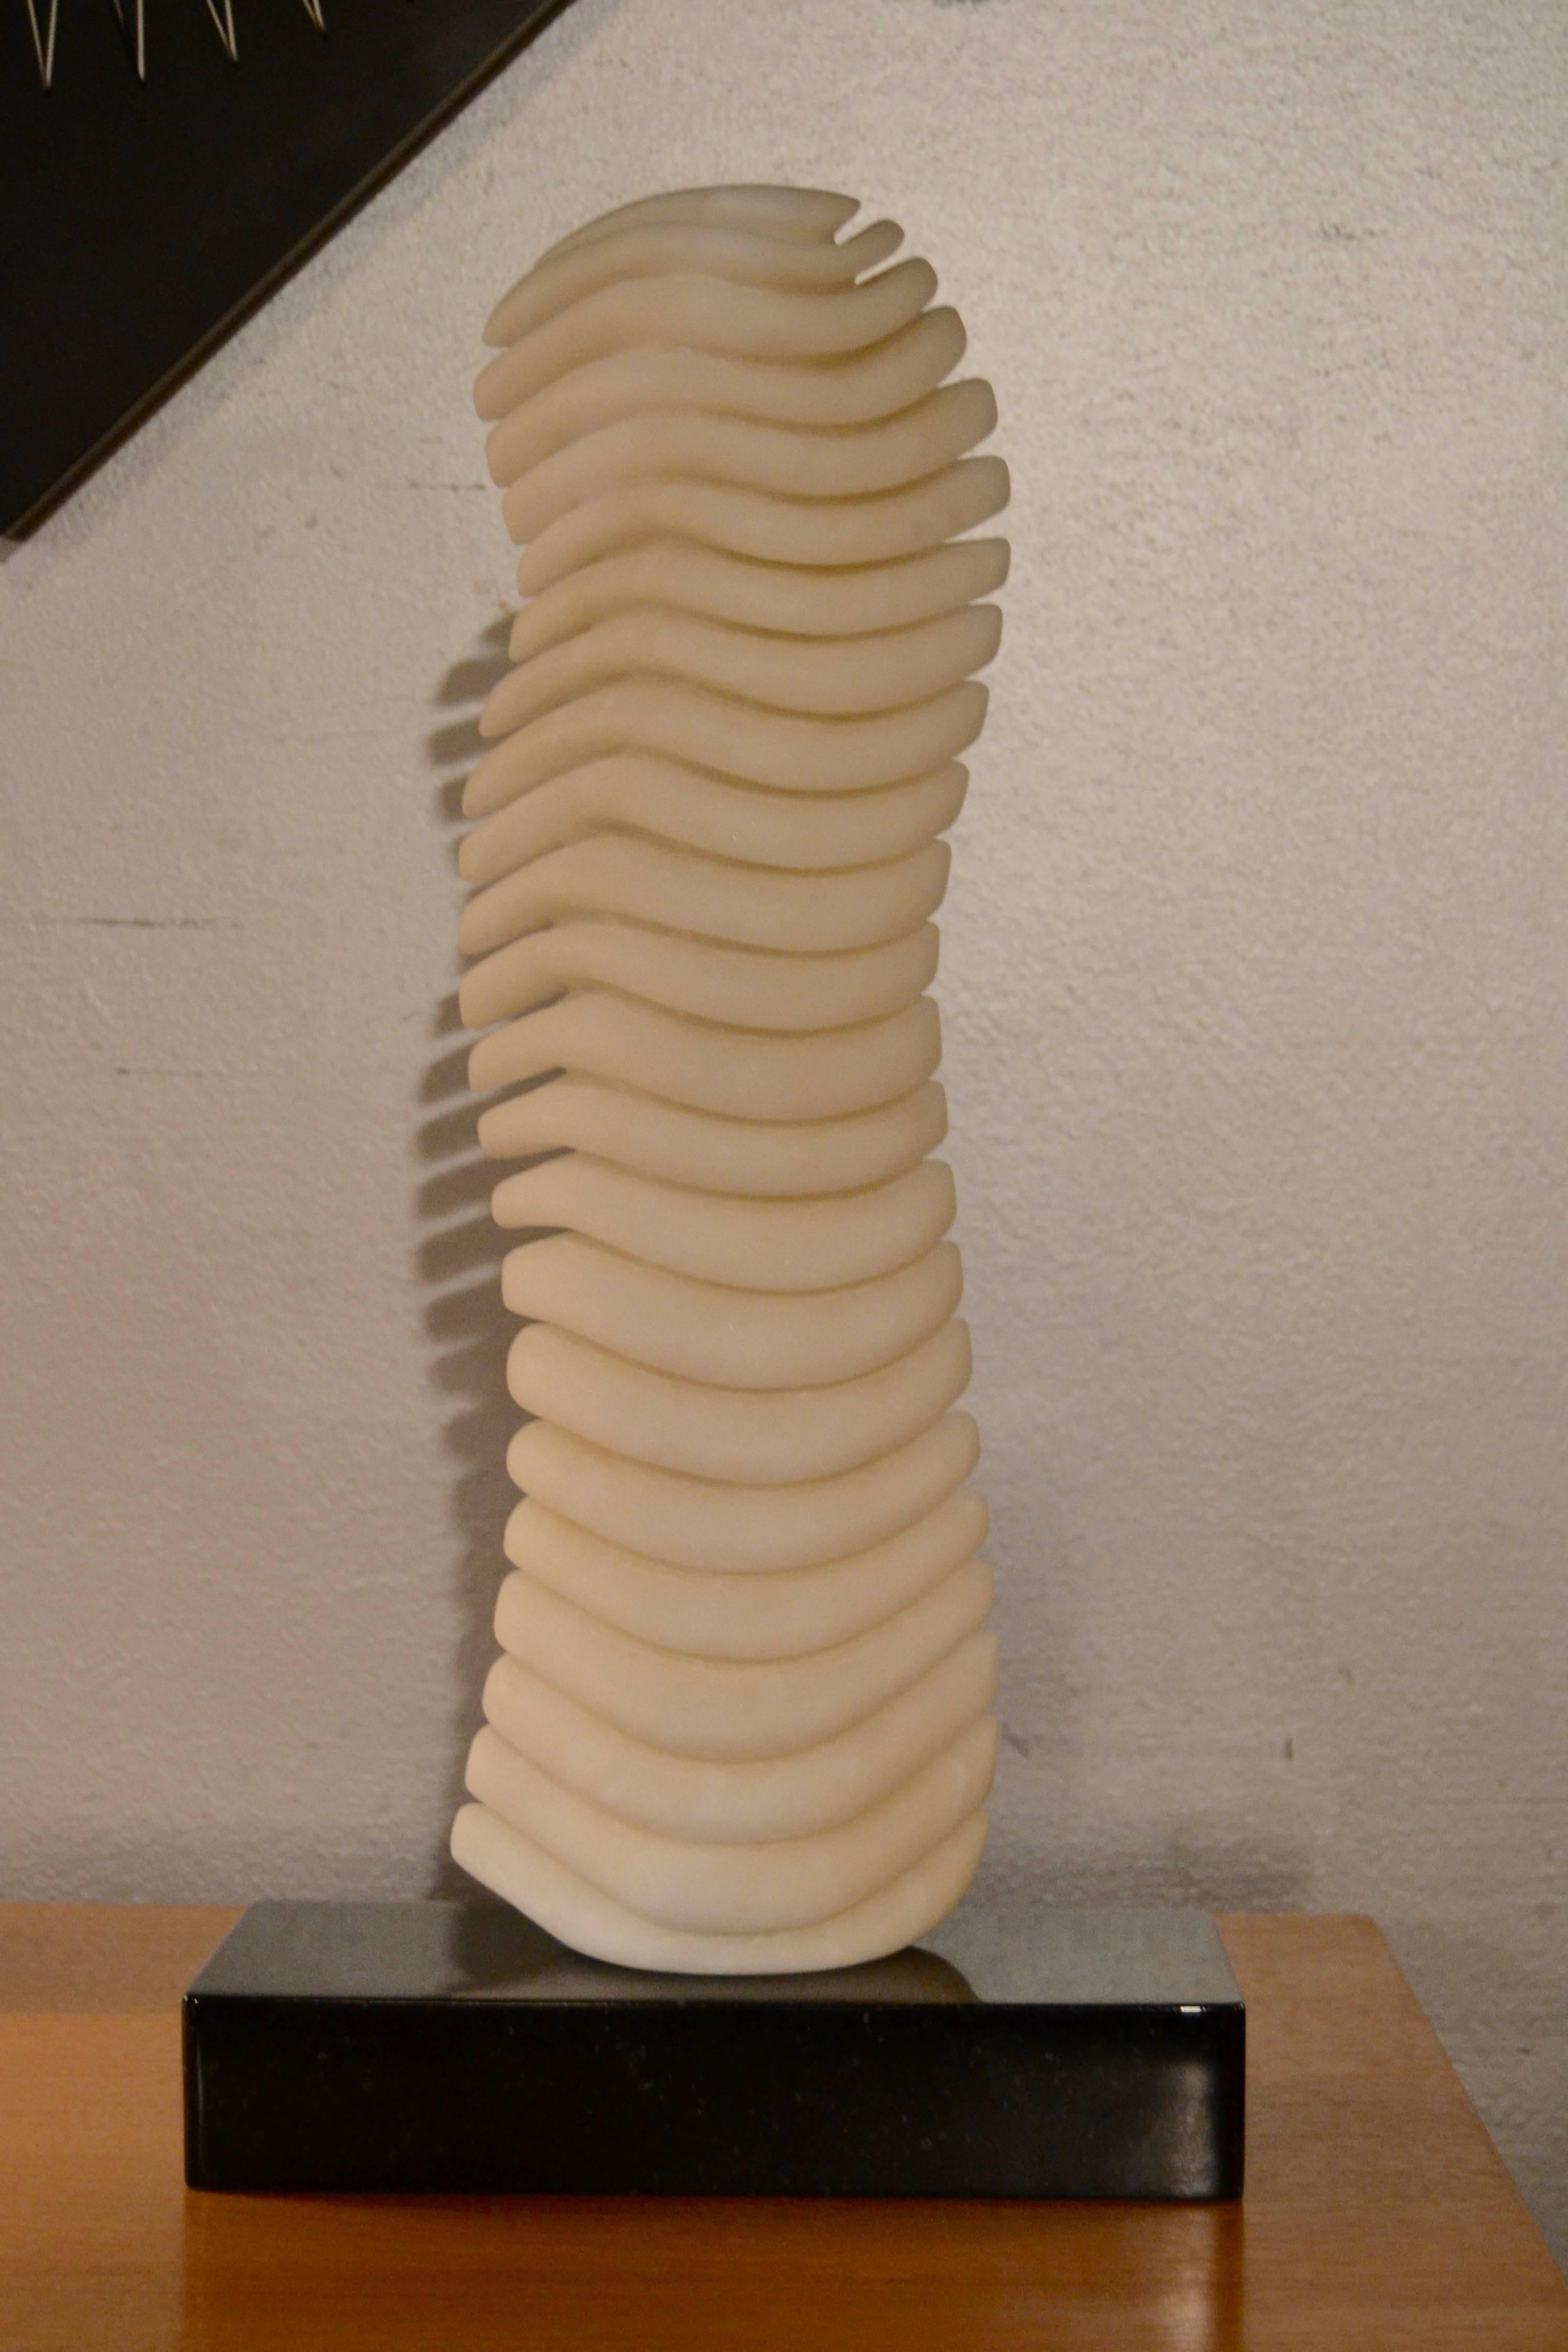 Late 20th century marble sculpture by the French artist JF Bourdier. Impresive quality of work, with rounded forms. Mounted on a black base.
Base dimensiones are (27cm/12cm/5cm.)